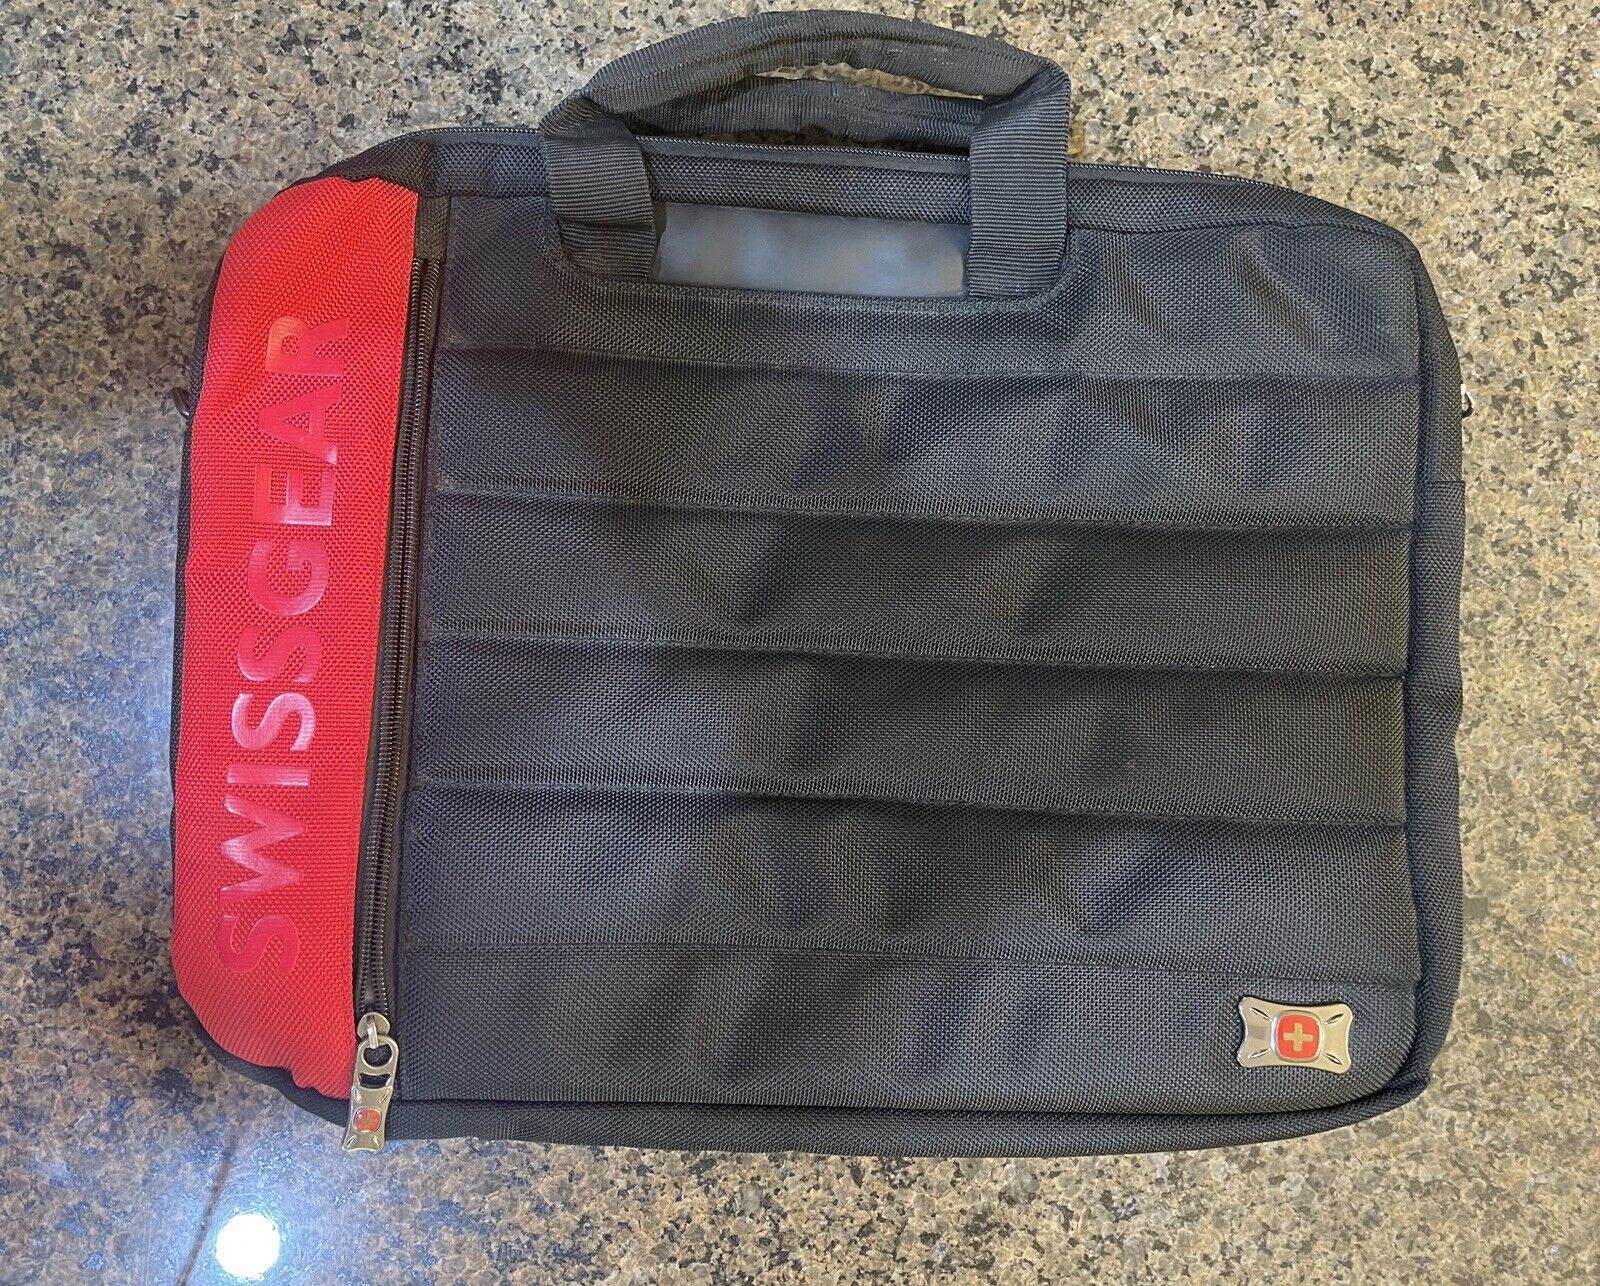 SwissGear By Wenger. Black And Red Padded Computer Bag. Great Condition